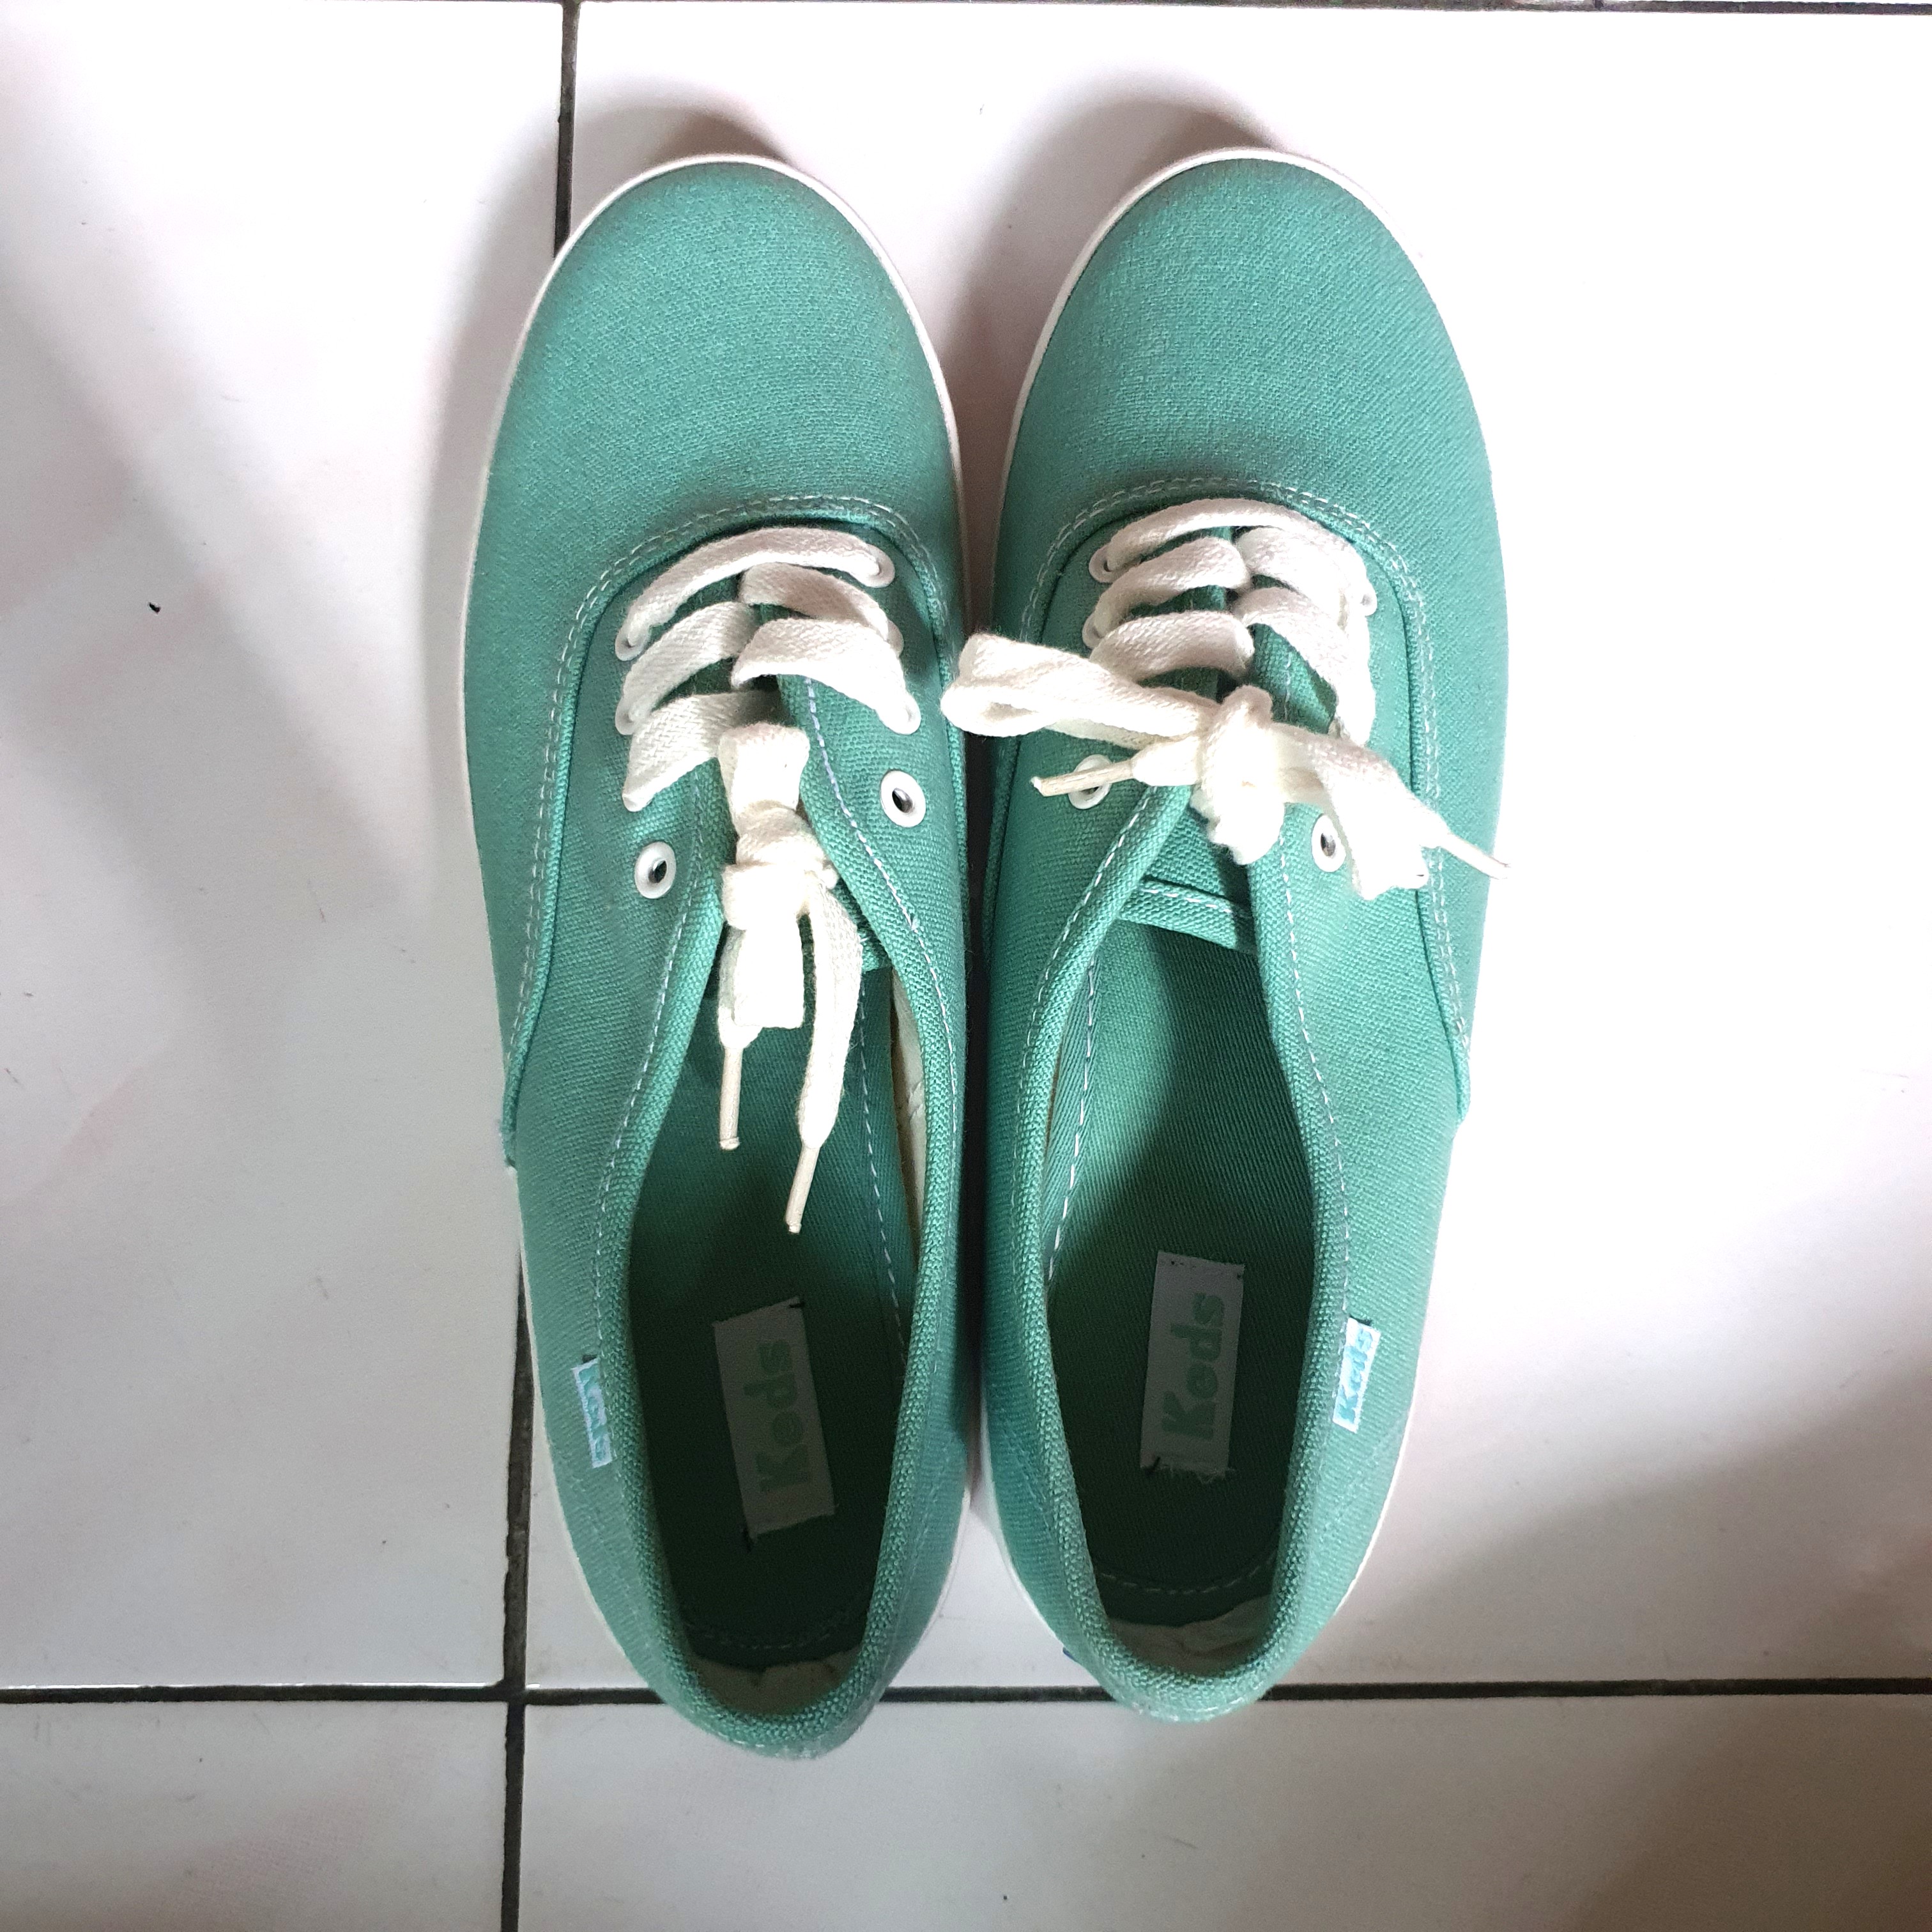 Keds insp Teal Mint Green Sneakers 